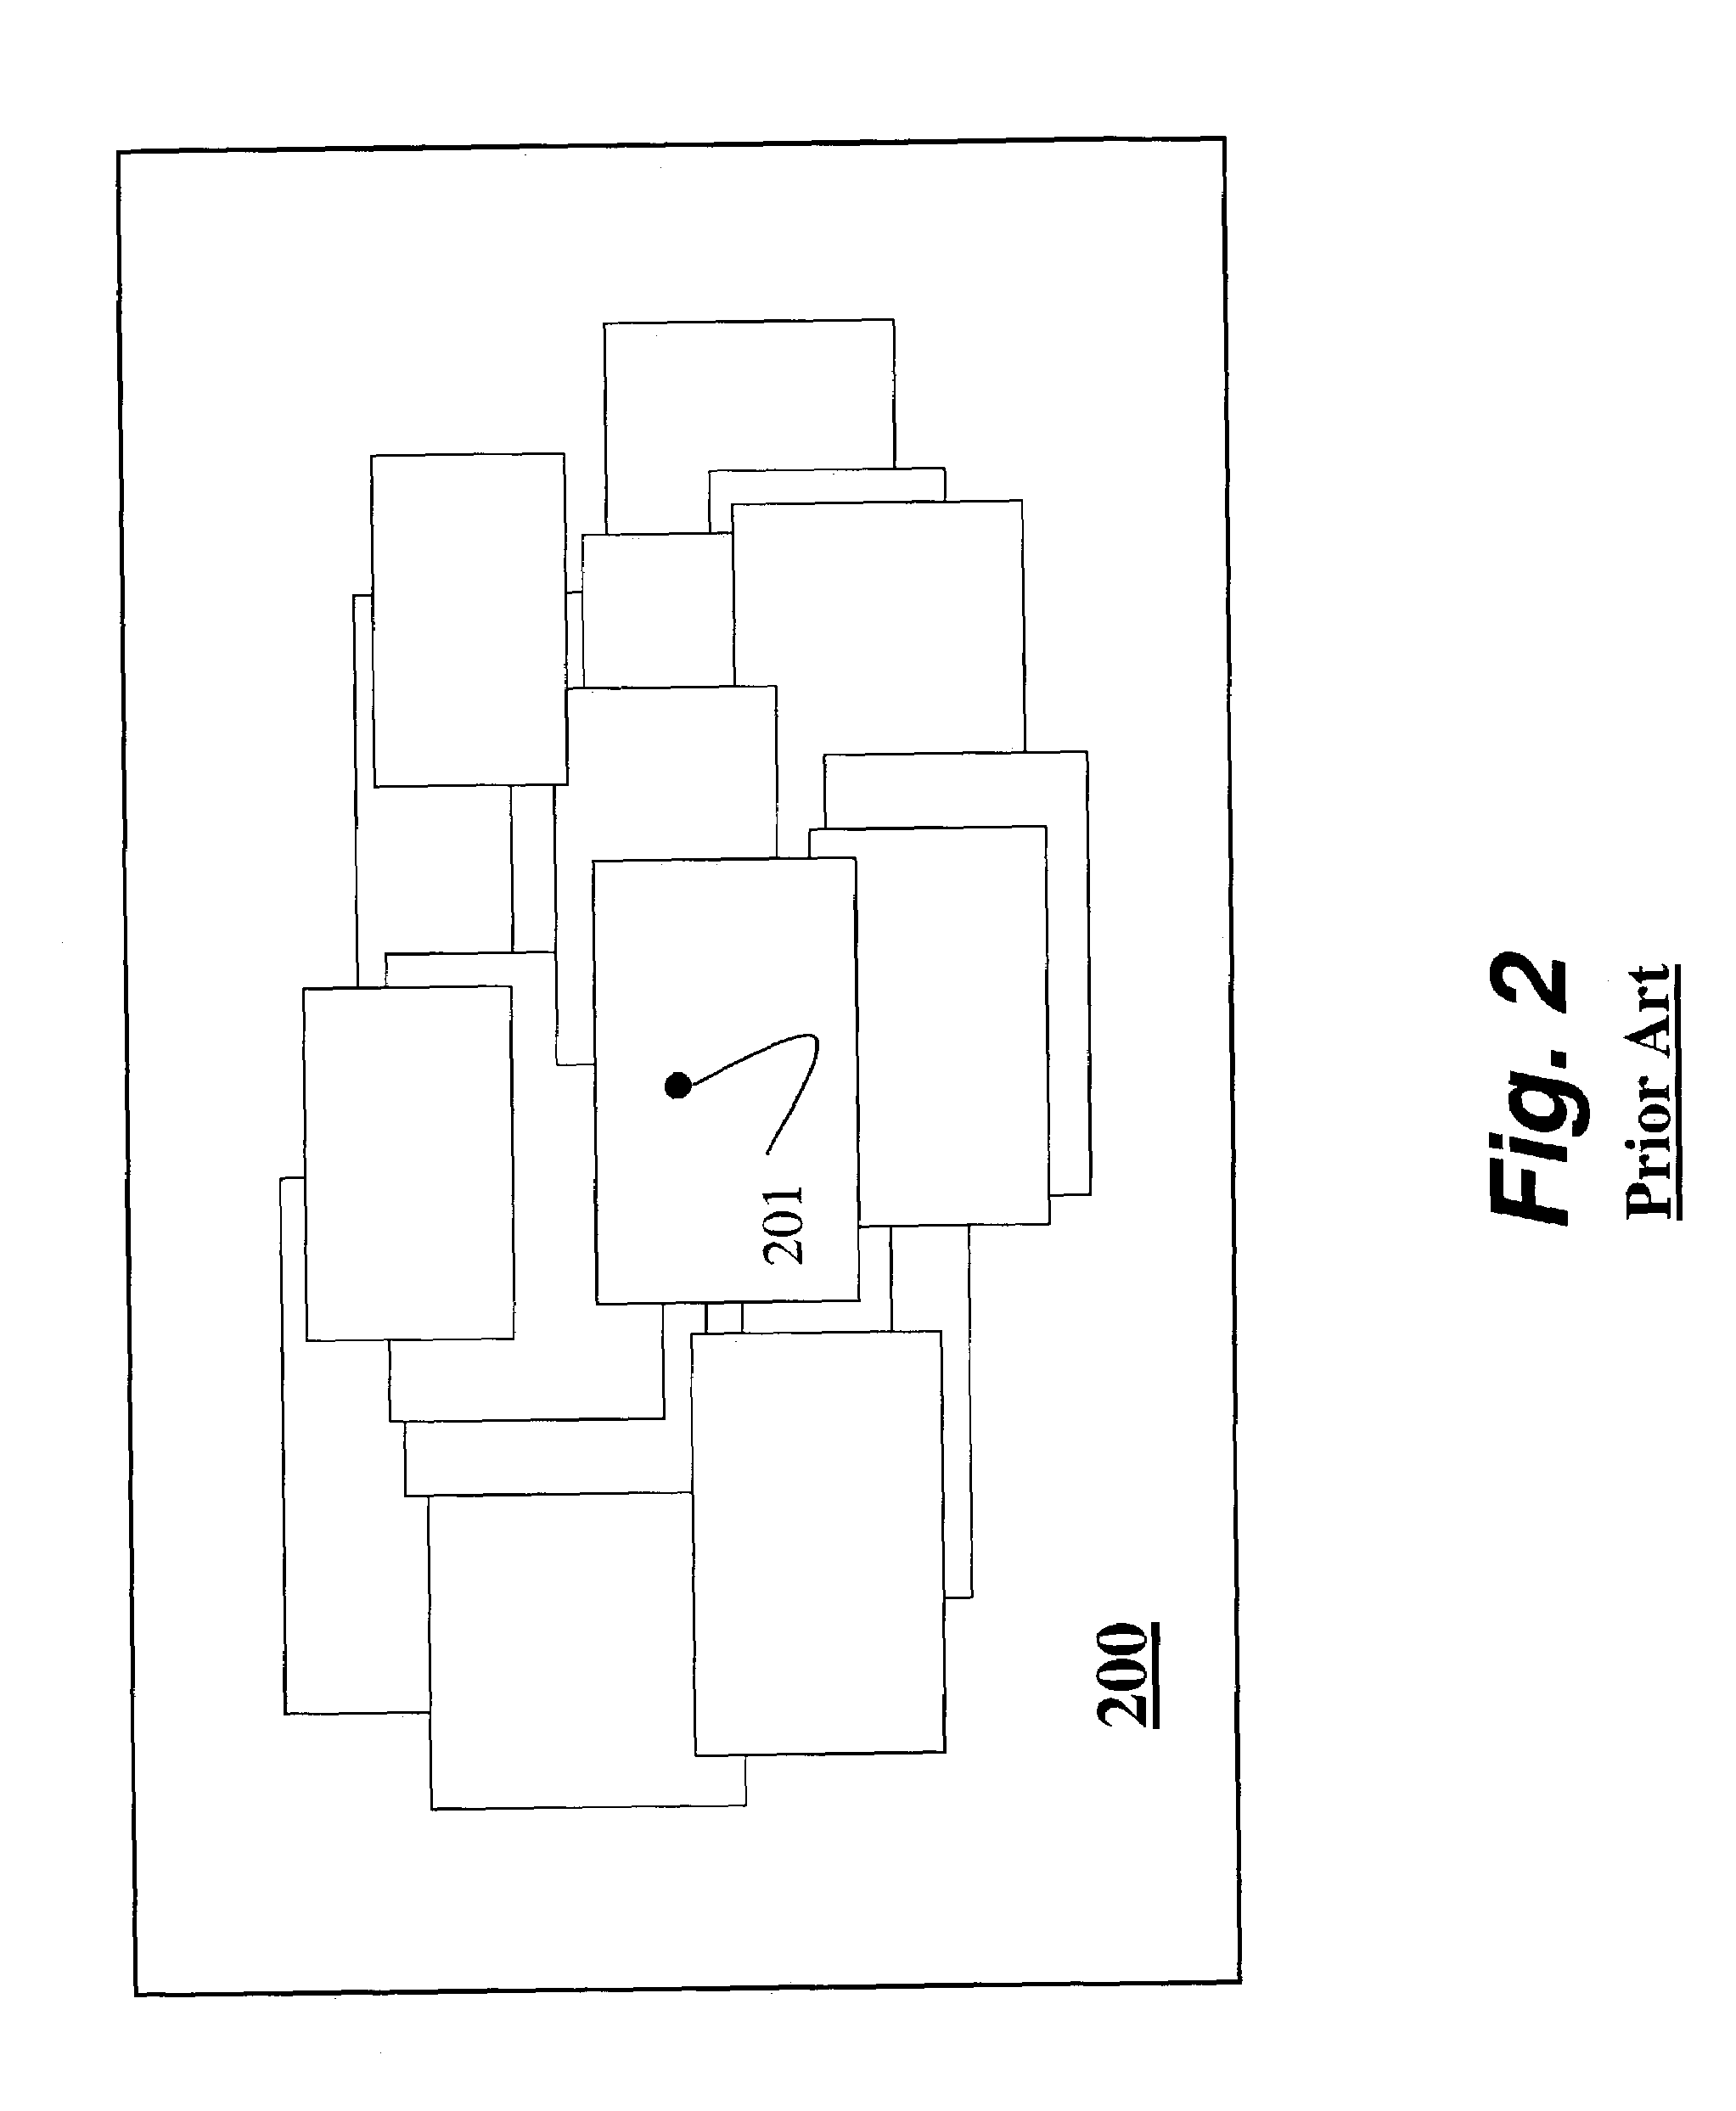 System and method for presenting and browsing images serially